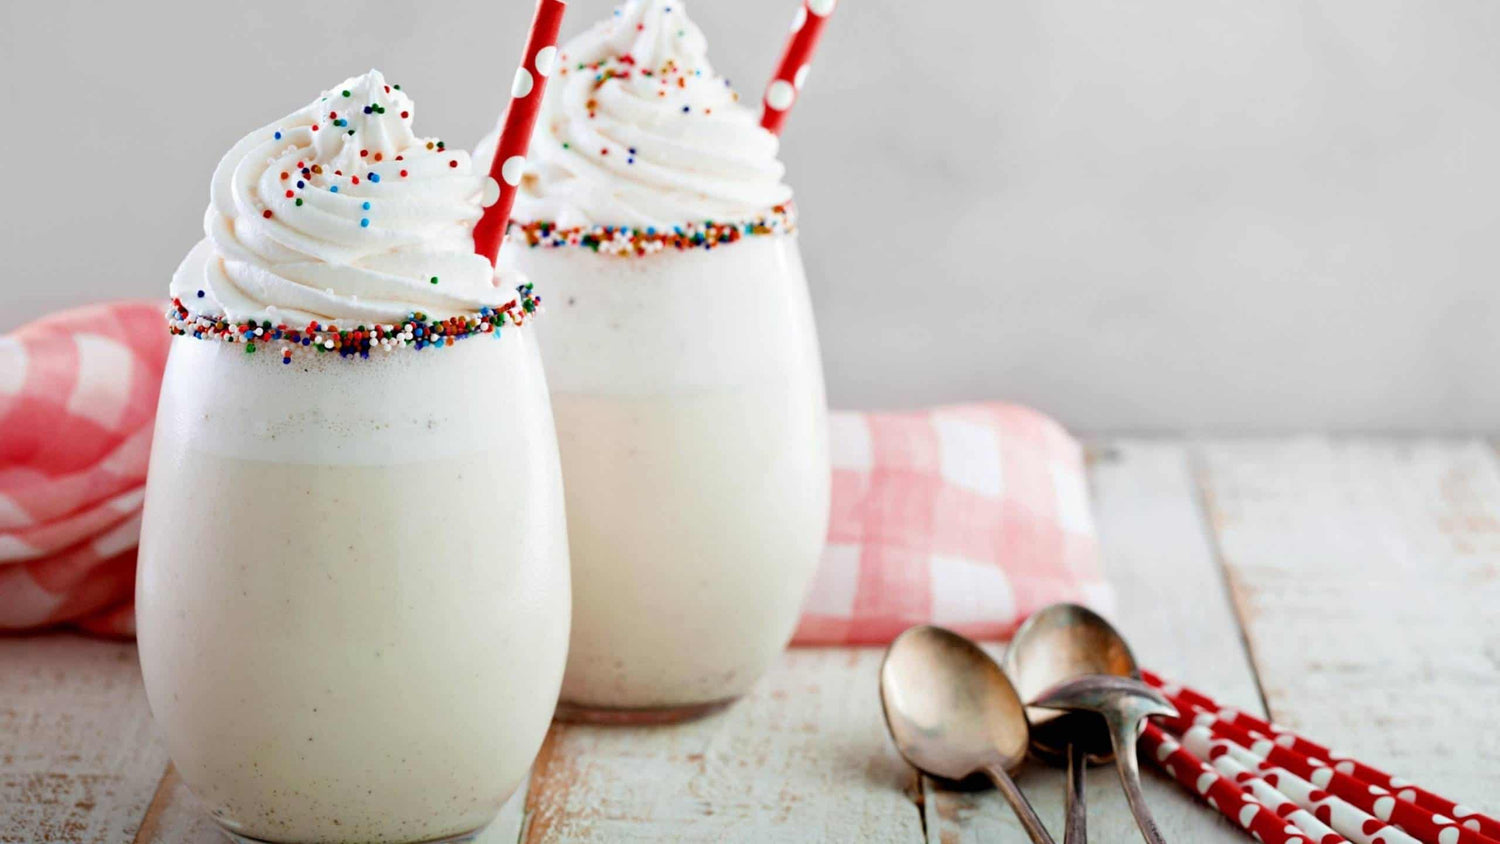 Celebrate In Style With Our Birthday Cake Smoothie